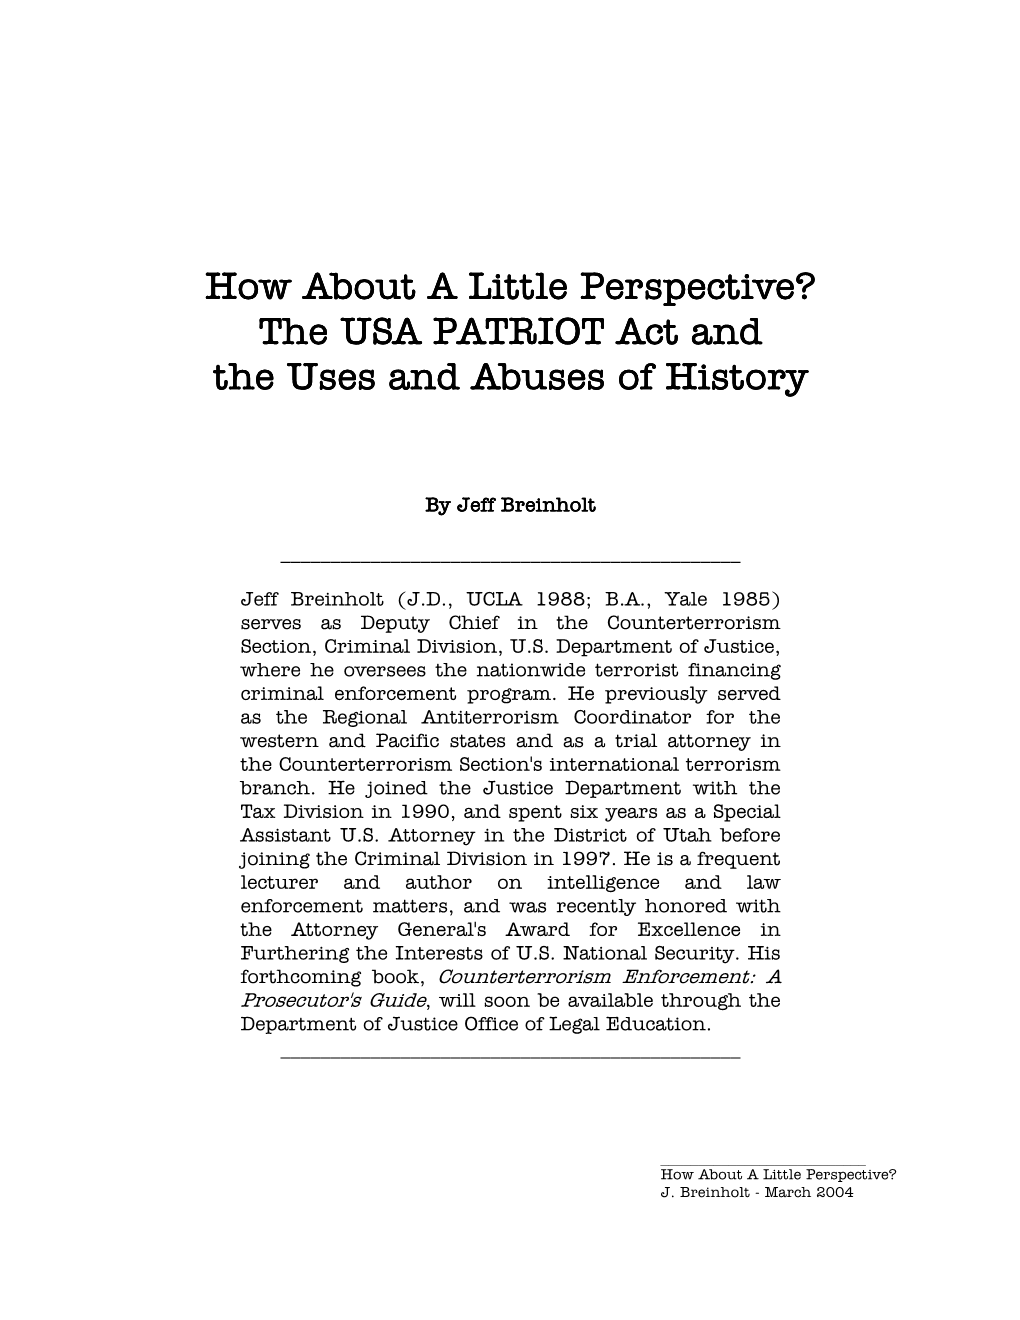 The USA PATRIOT Act and the Use and Abuses of History